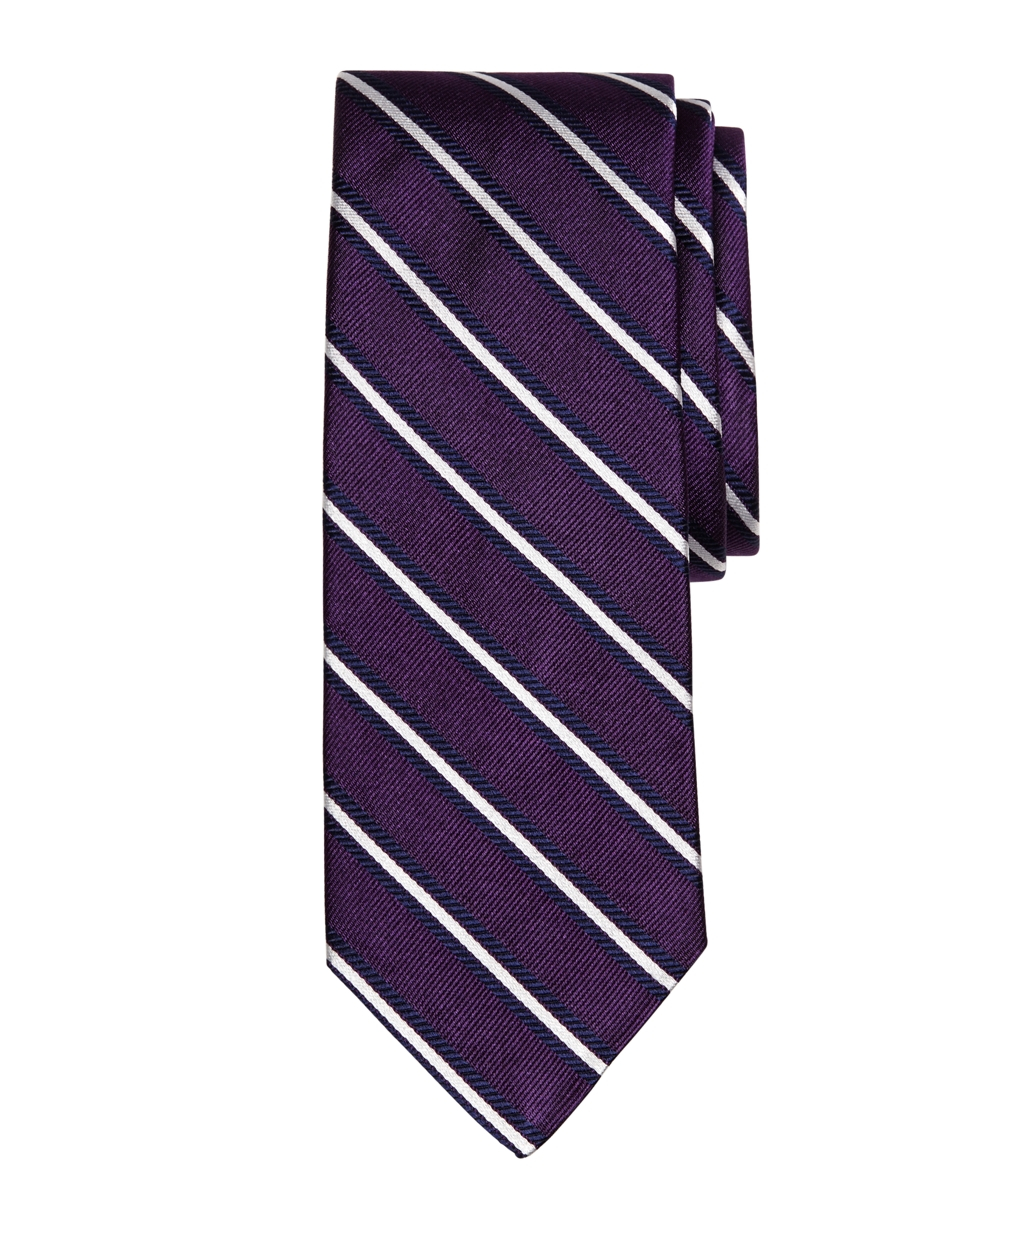 Lyst - Brooks Brothers Framed Rep Stripe Tie in Purple for Men